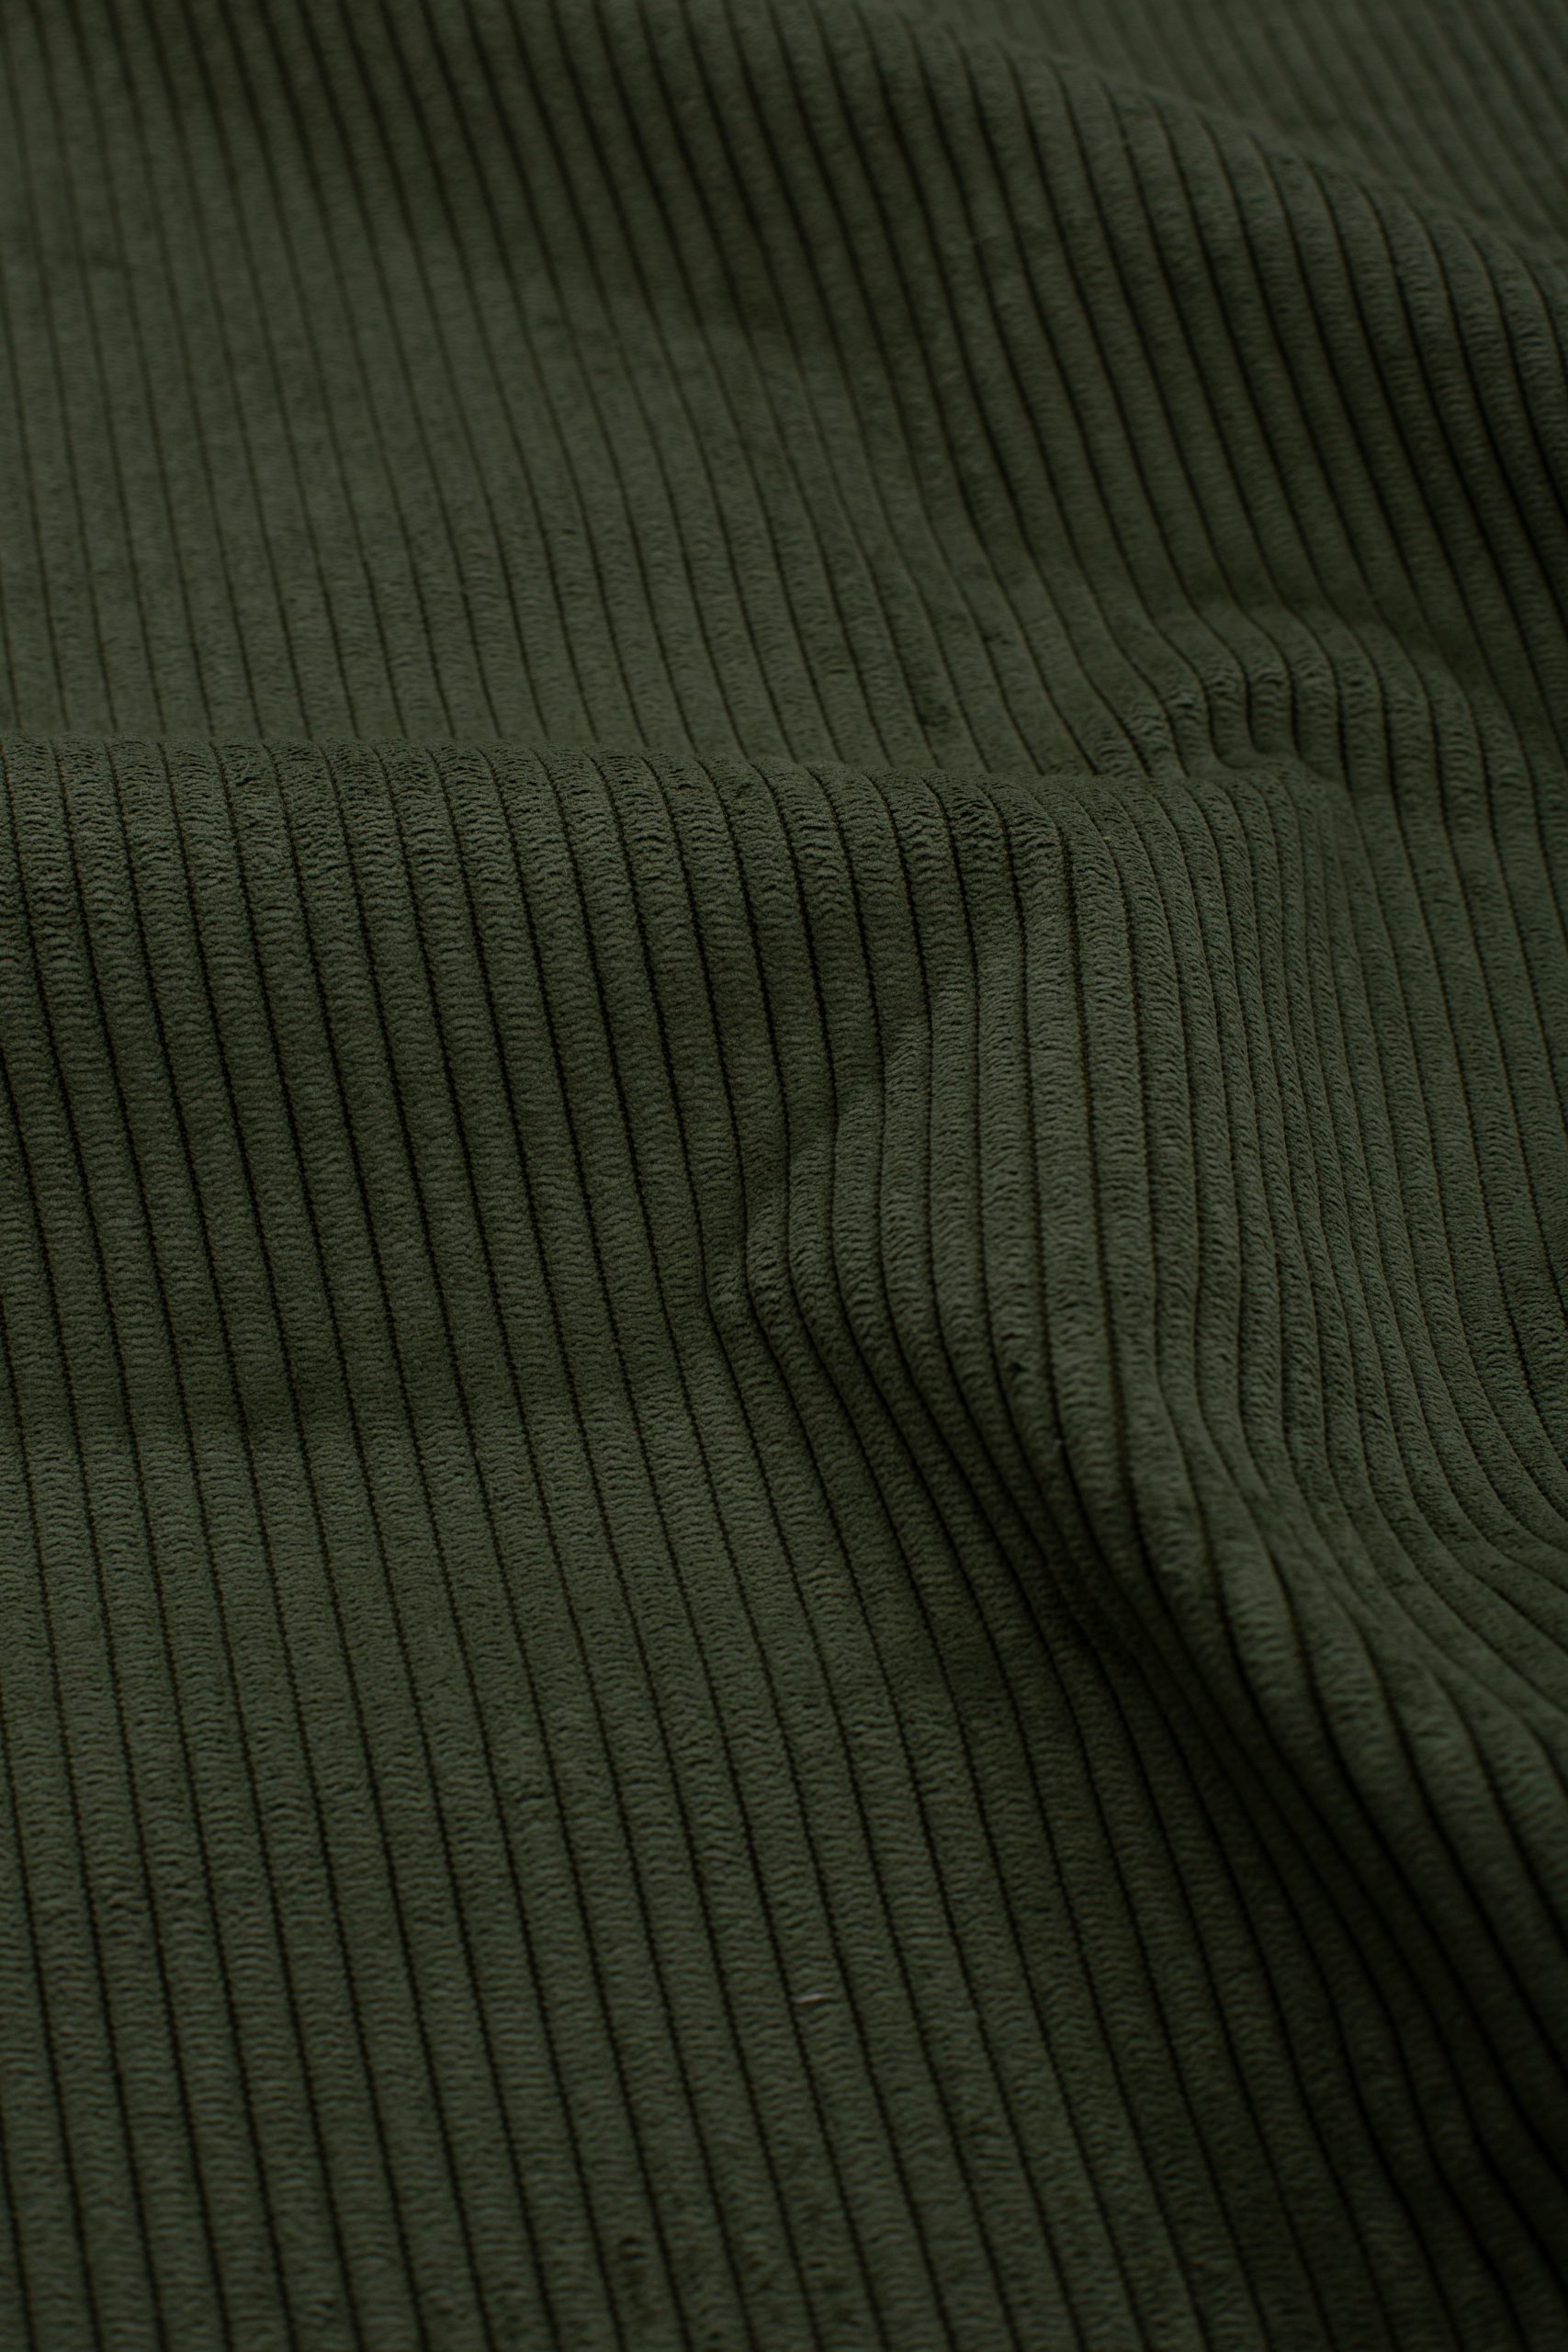 Relaxed Plains Lazy Moss Fabric